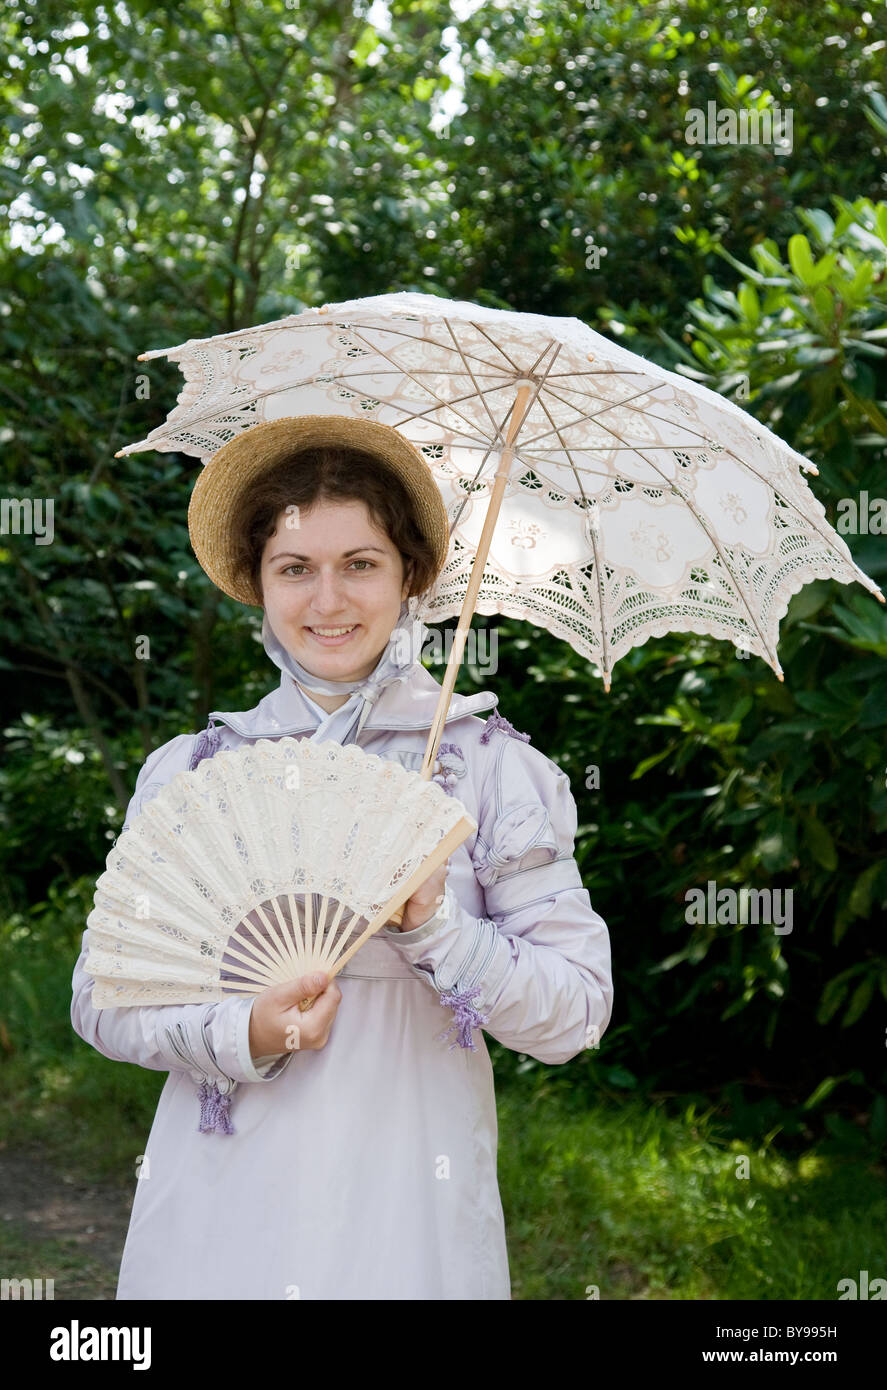 Lady With Parasol High Resolution Stock Photography and Images - Alamy